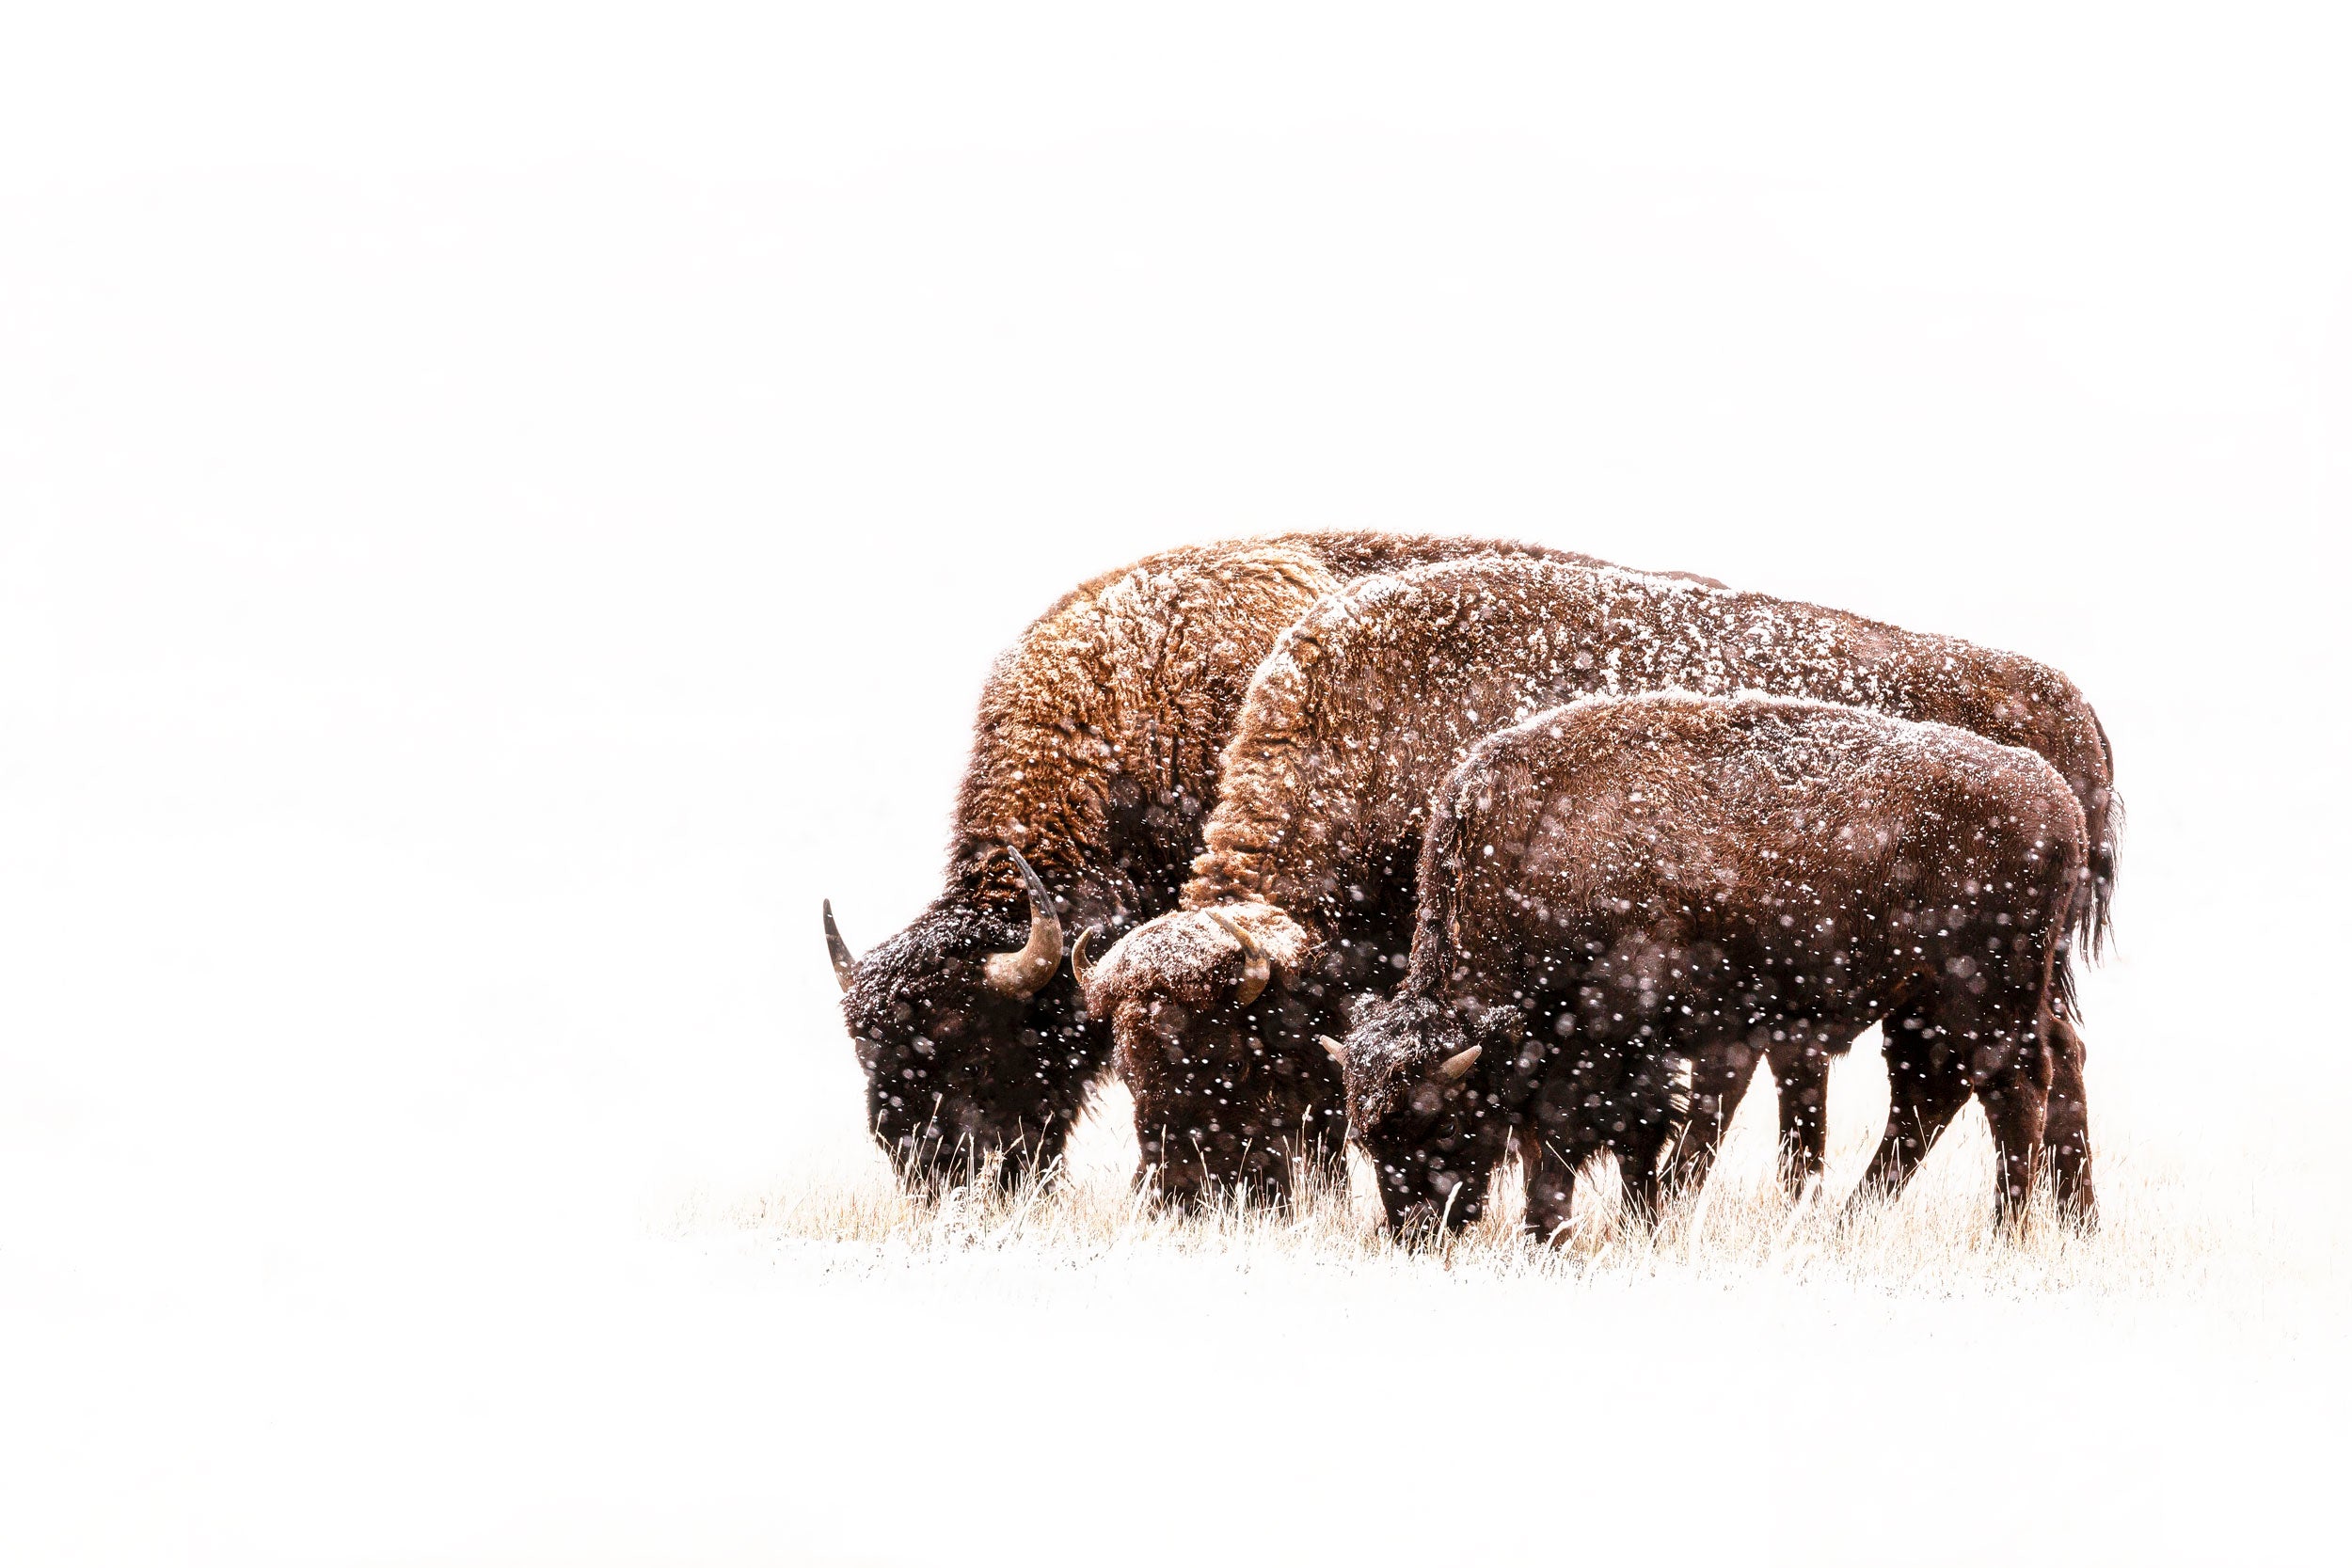 A Lars Gesing Fine Art Nature photograph of bison in the snow near Denver, Colorado, at the Rocky Mountain Wildlife Arsenal, a bestselling artwork.